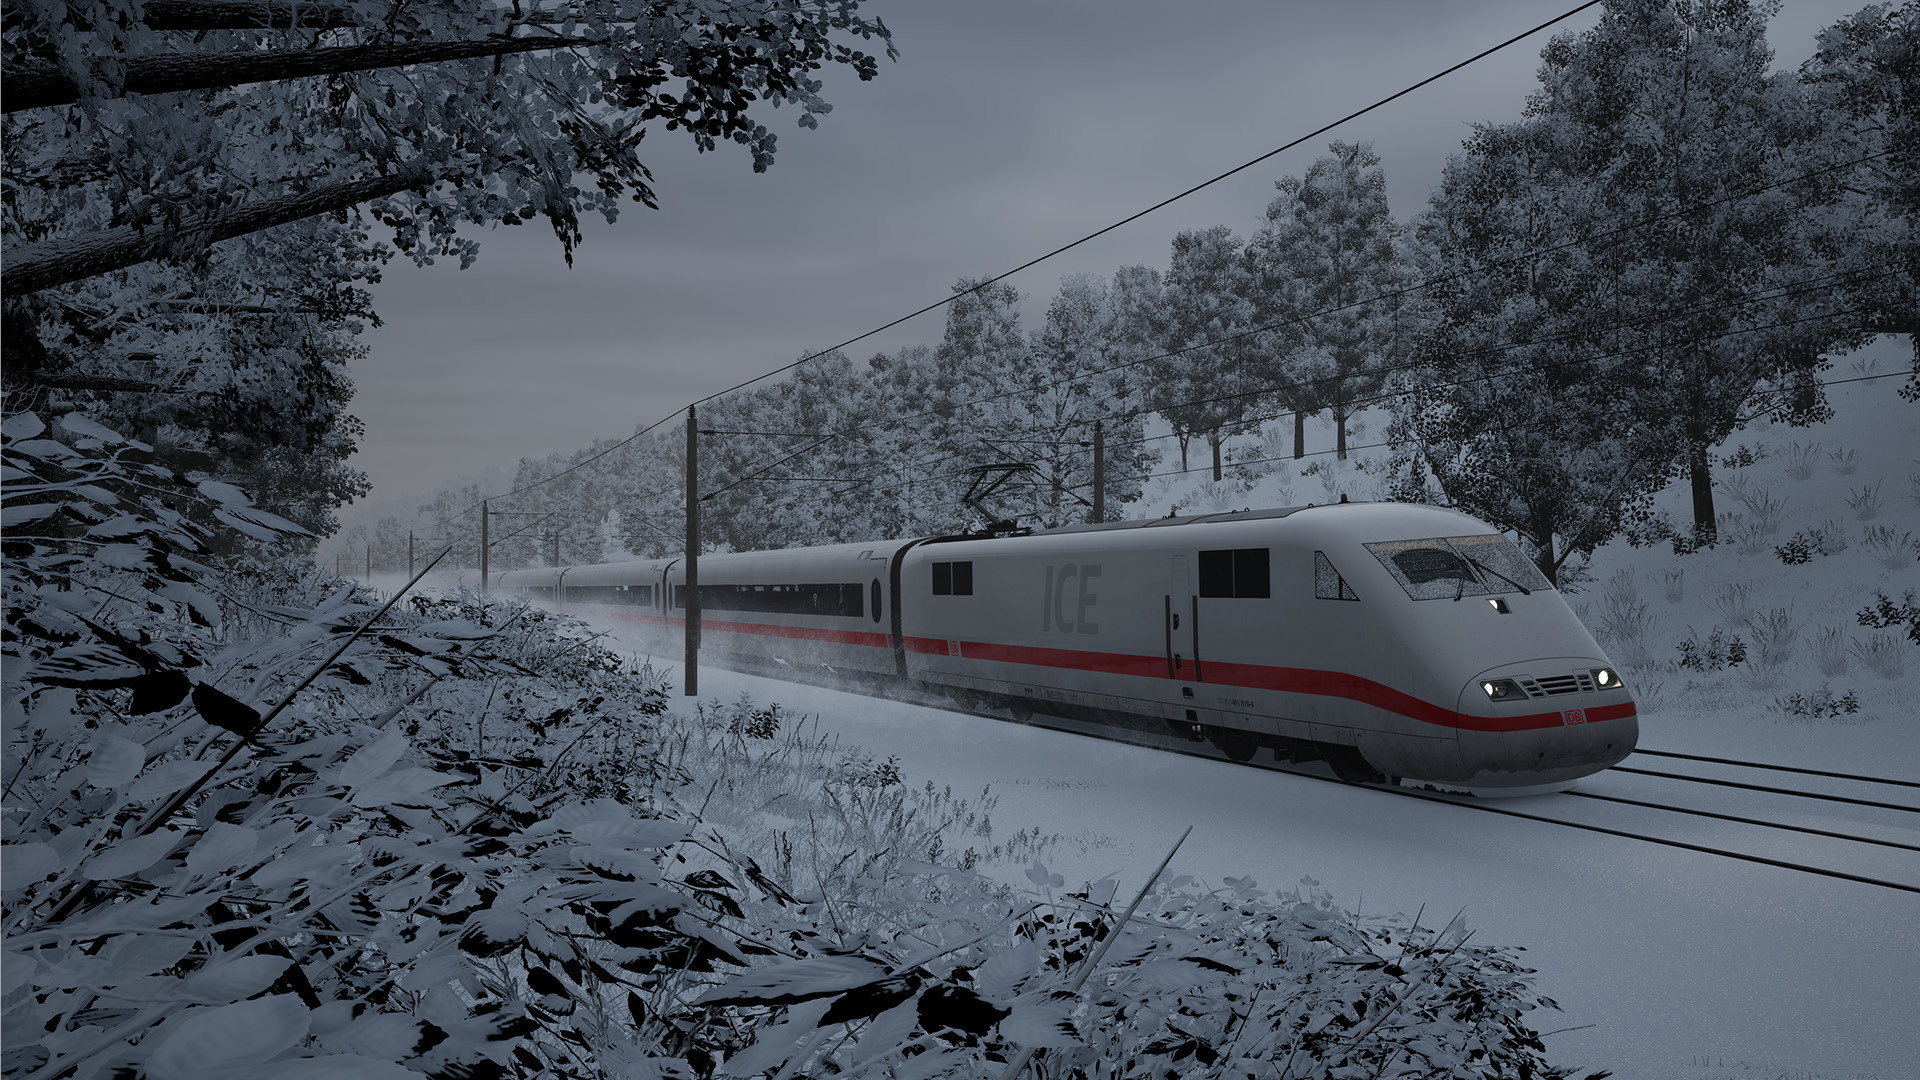 Next week on Steam: Train Sim World 3 with 280 km/h in the ICE 1 and high system requirements